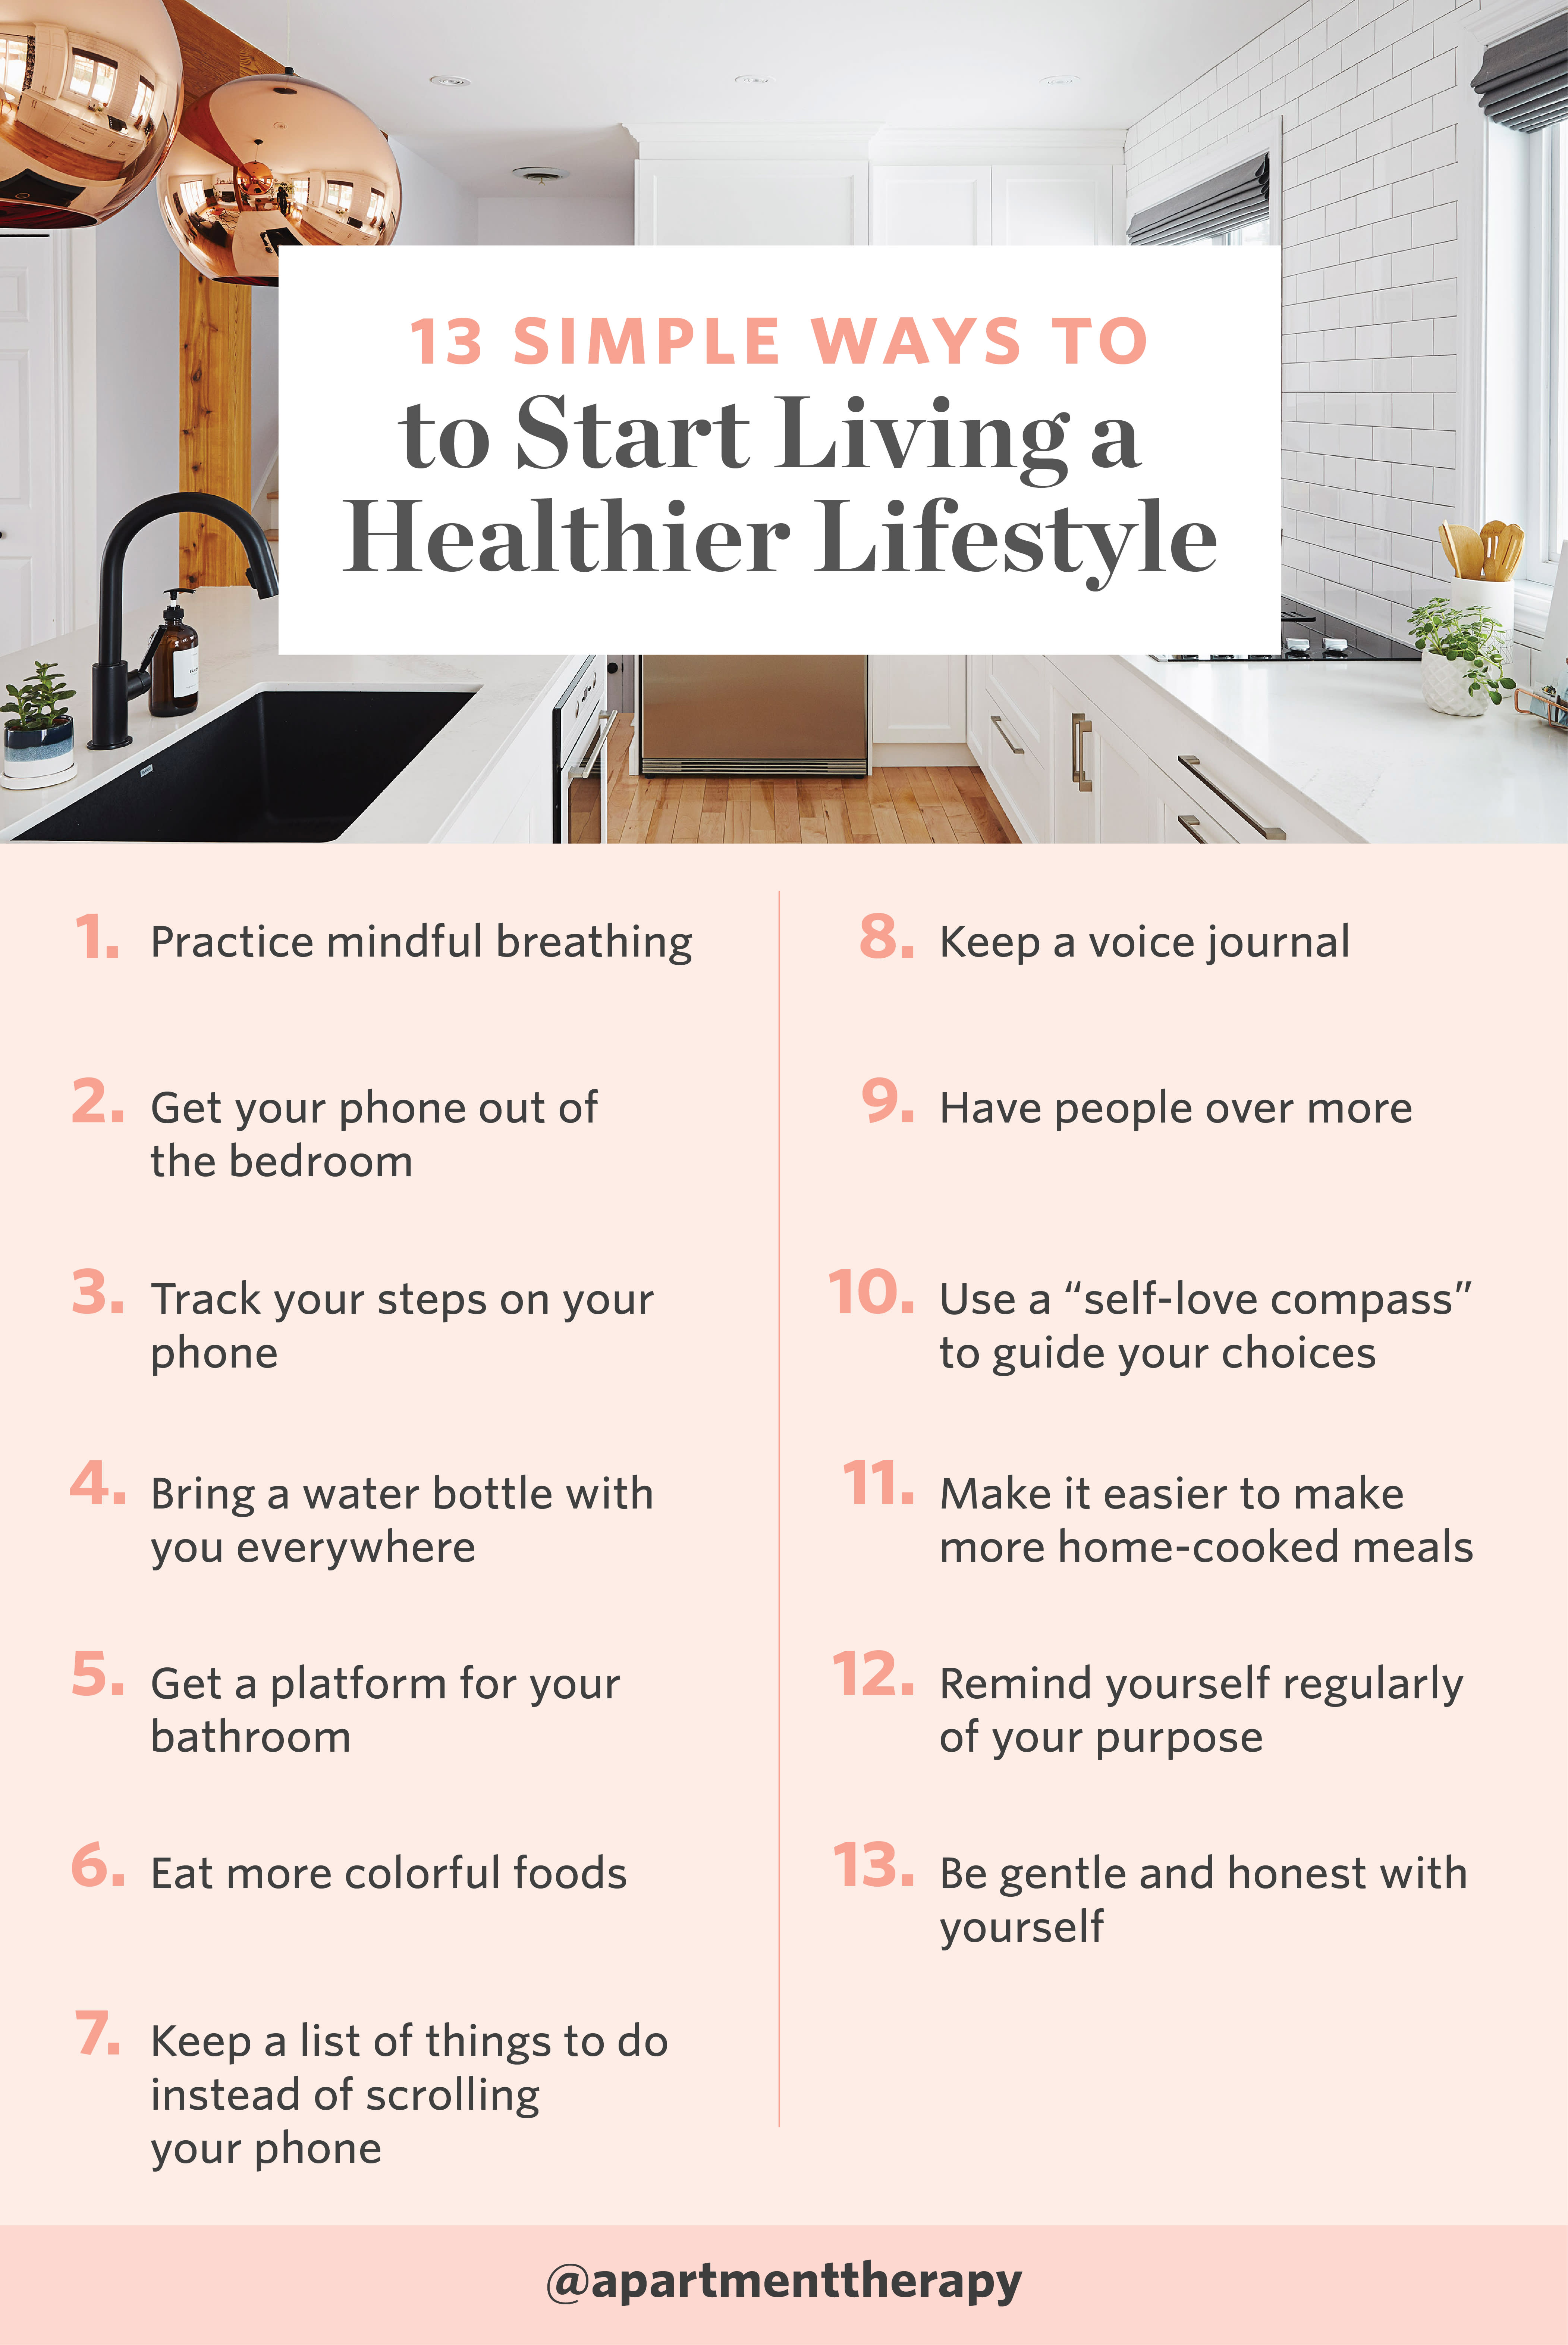 10 TIPS FOR MAINTAINING A HEALTHY LIFESTYLE